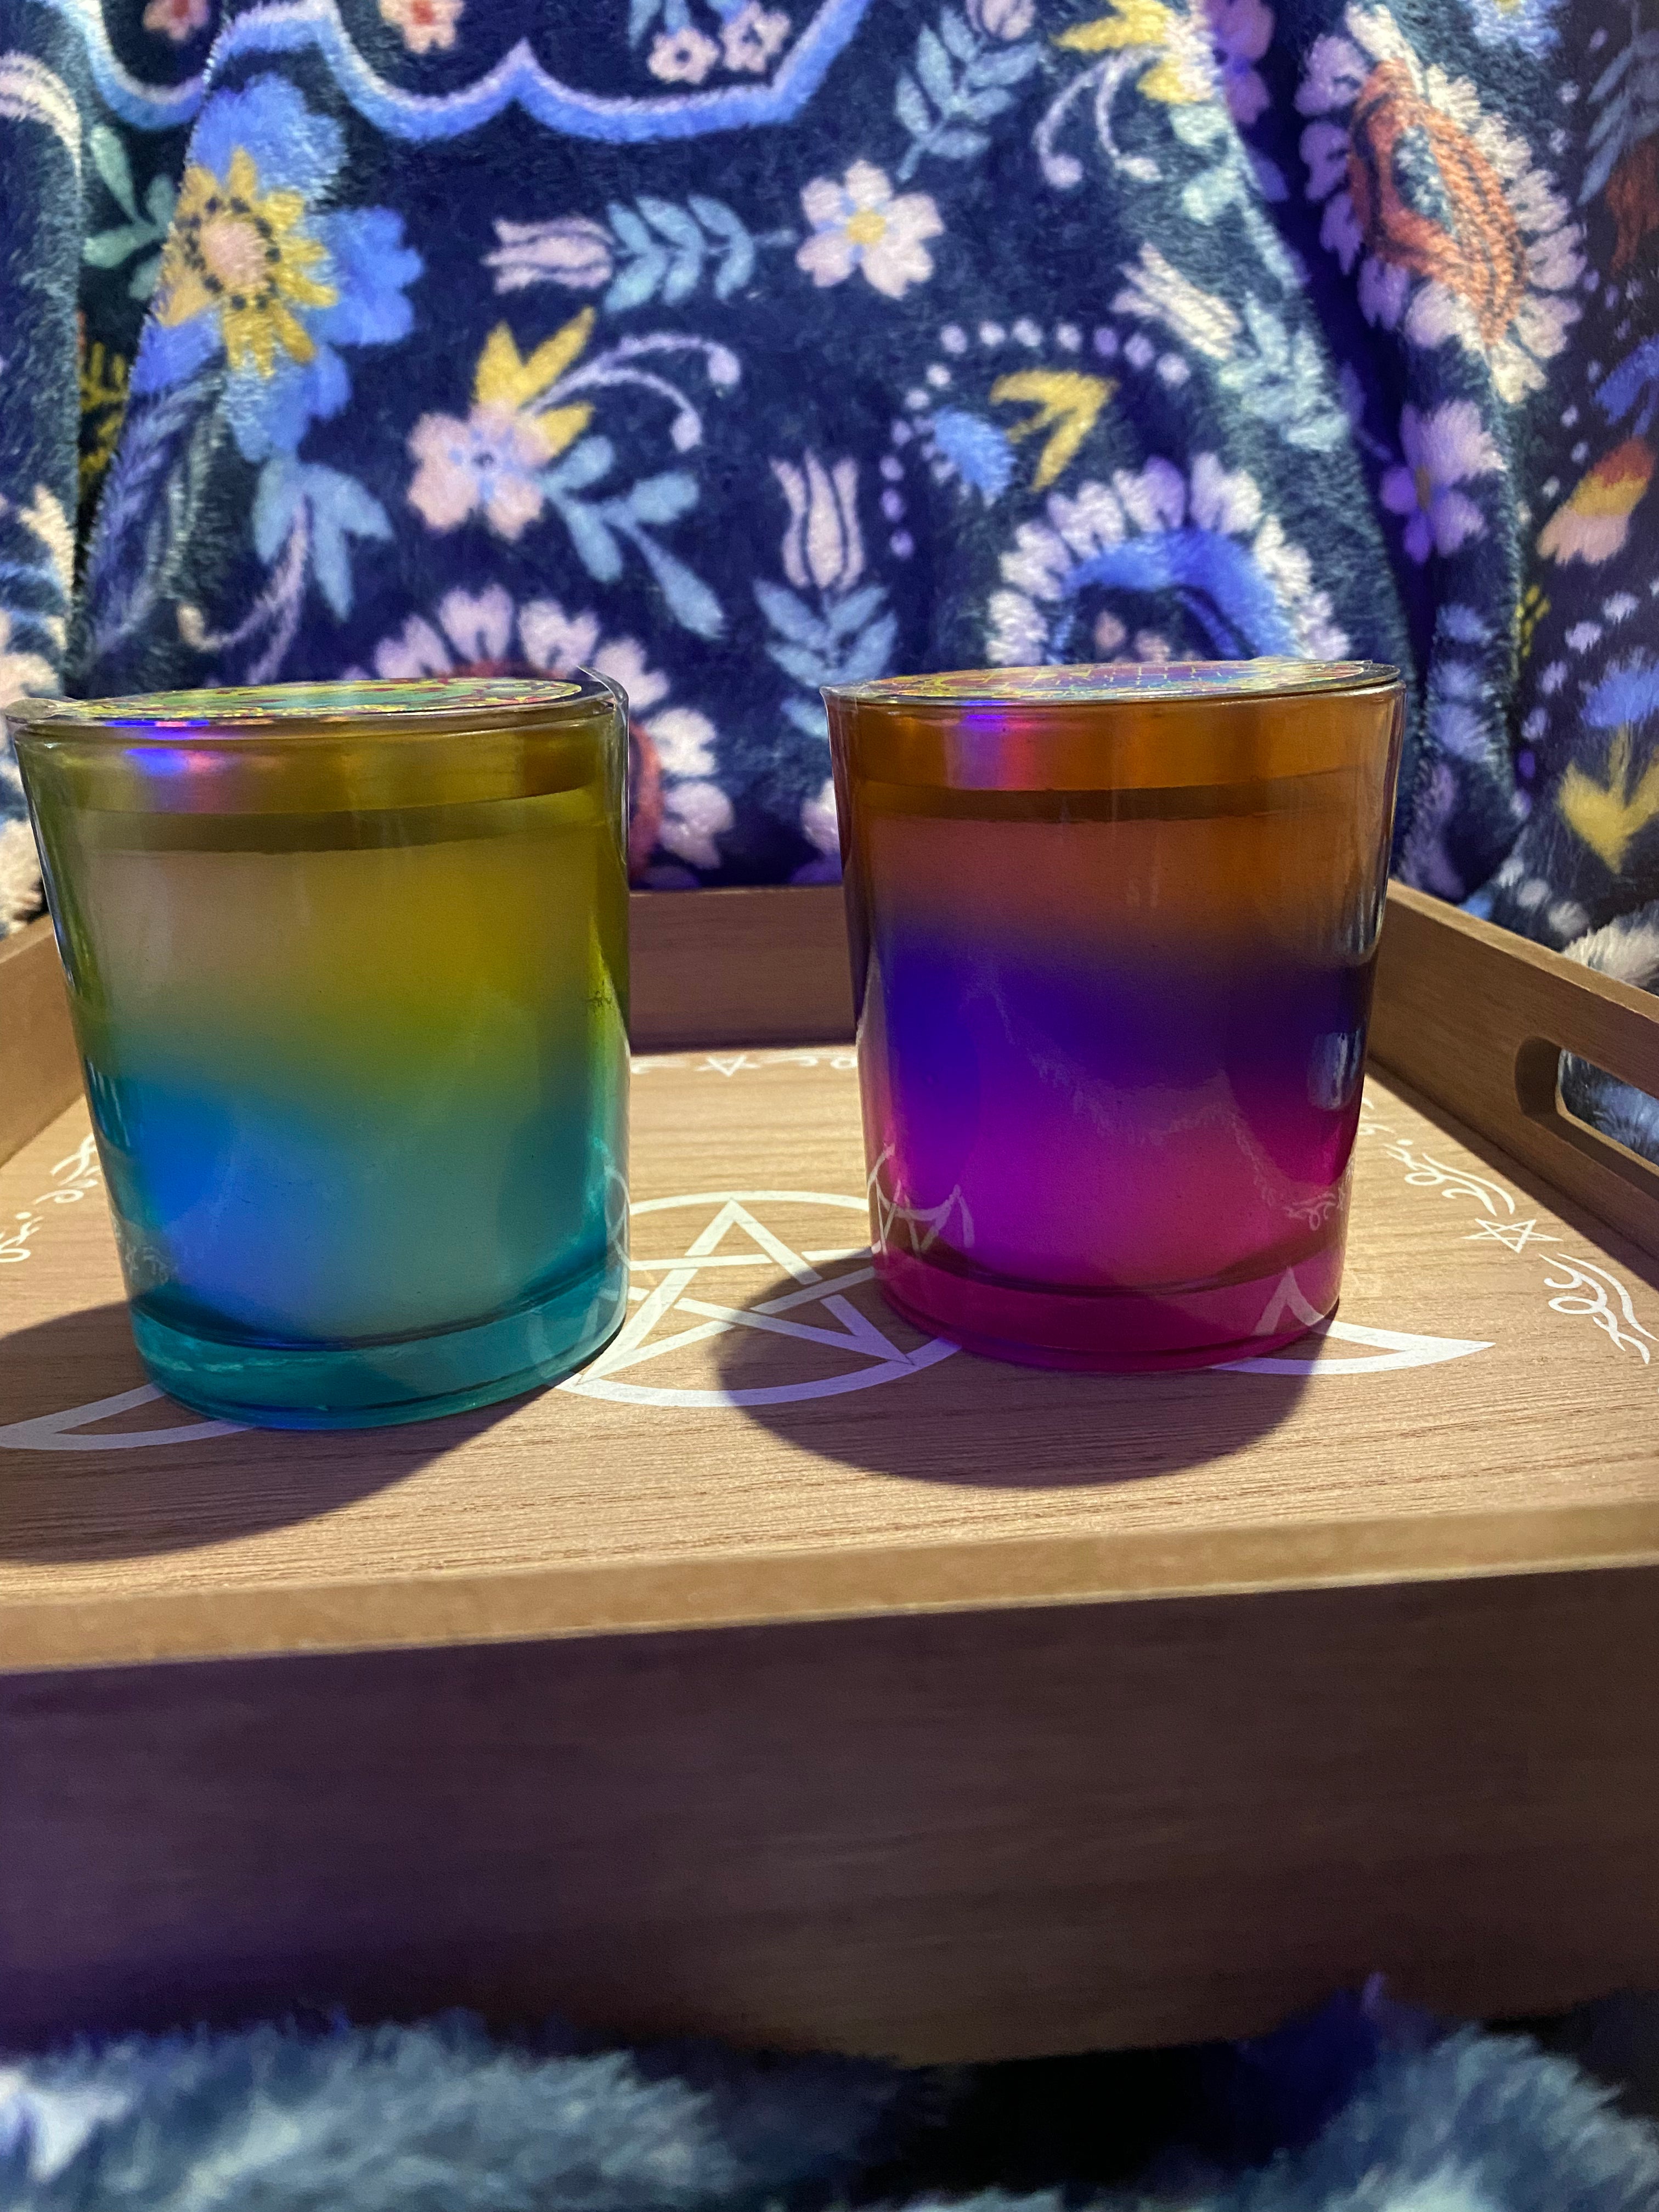 Psychedelic Fun Candles